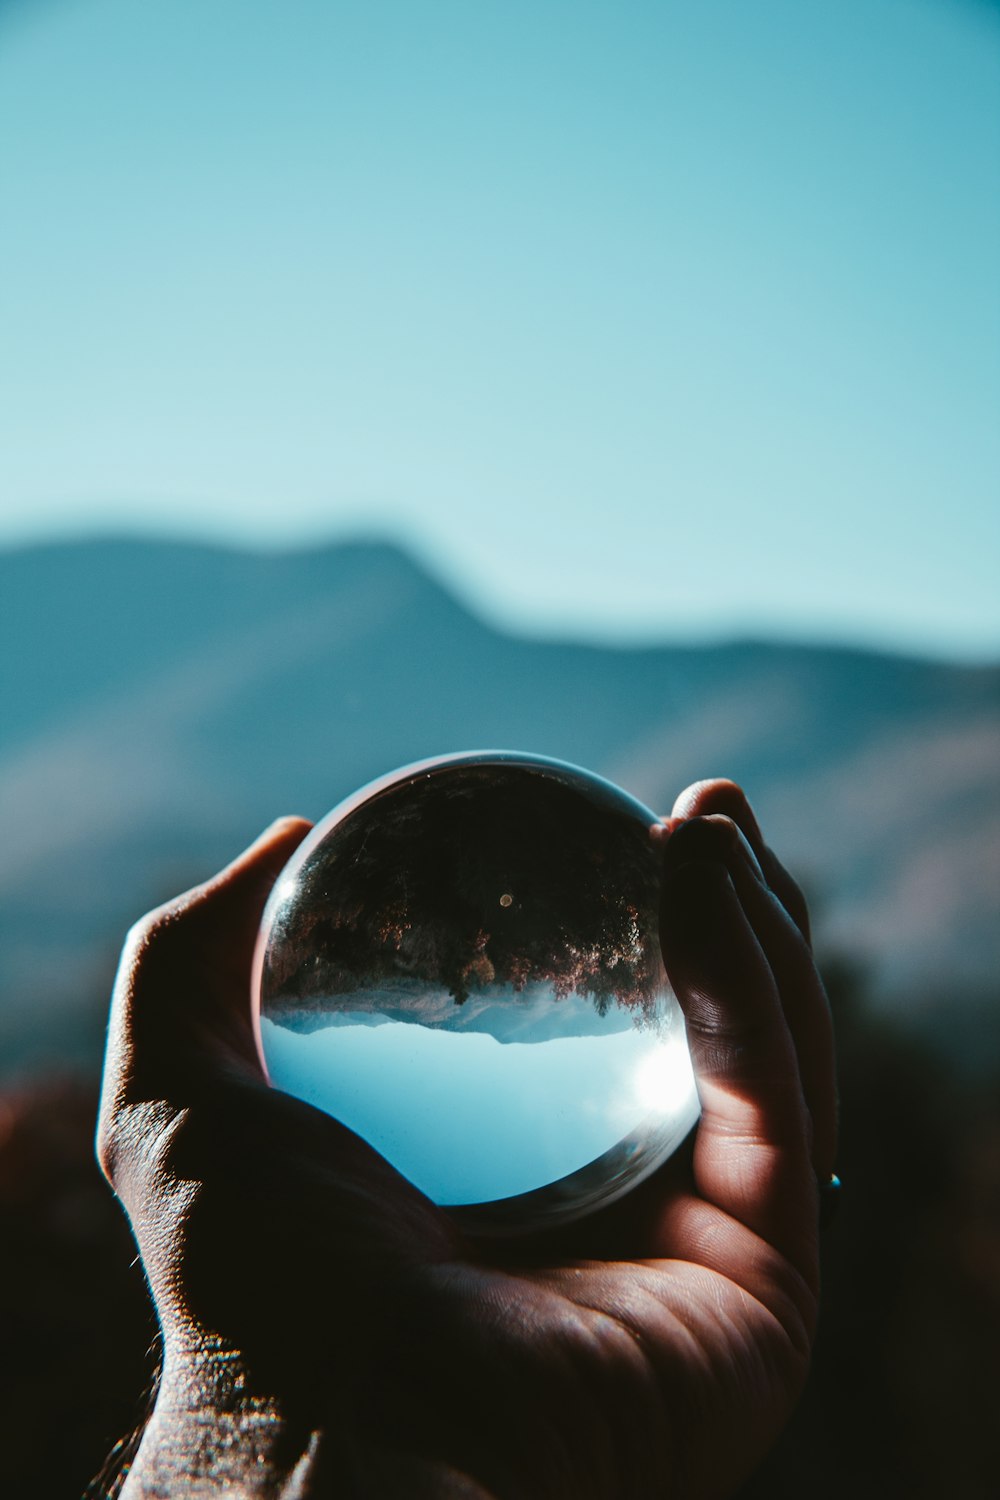 a person holding a crystal ball in their hand